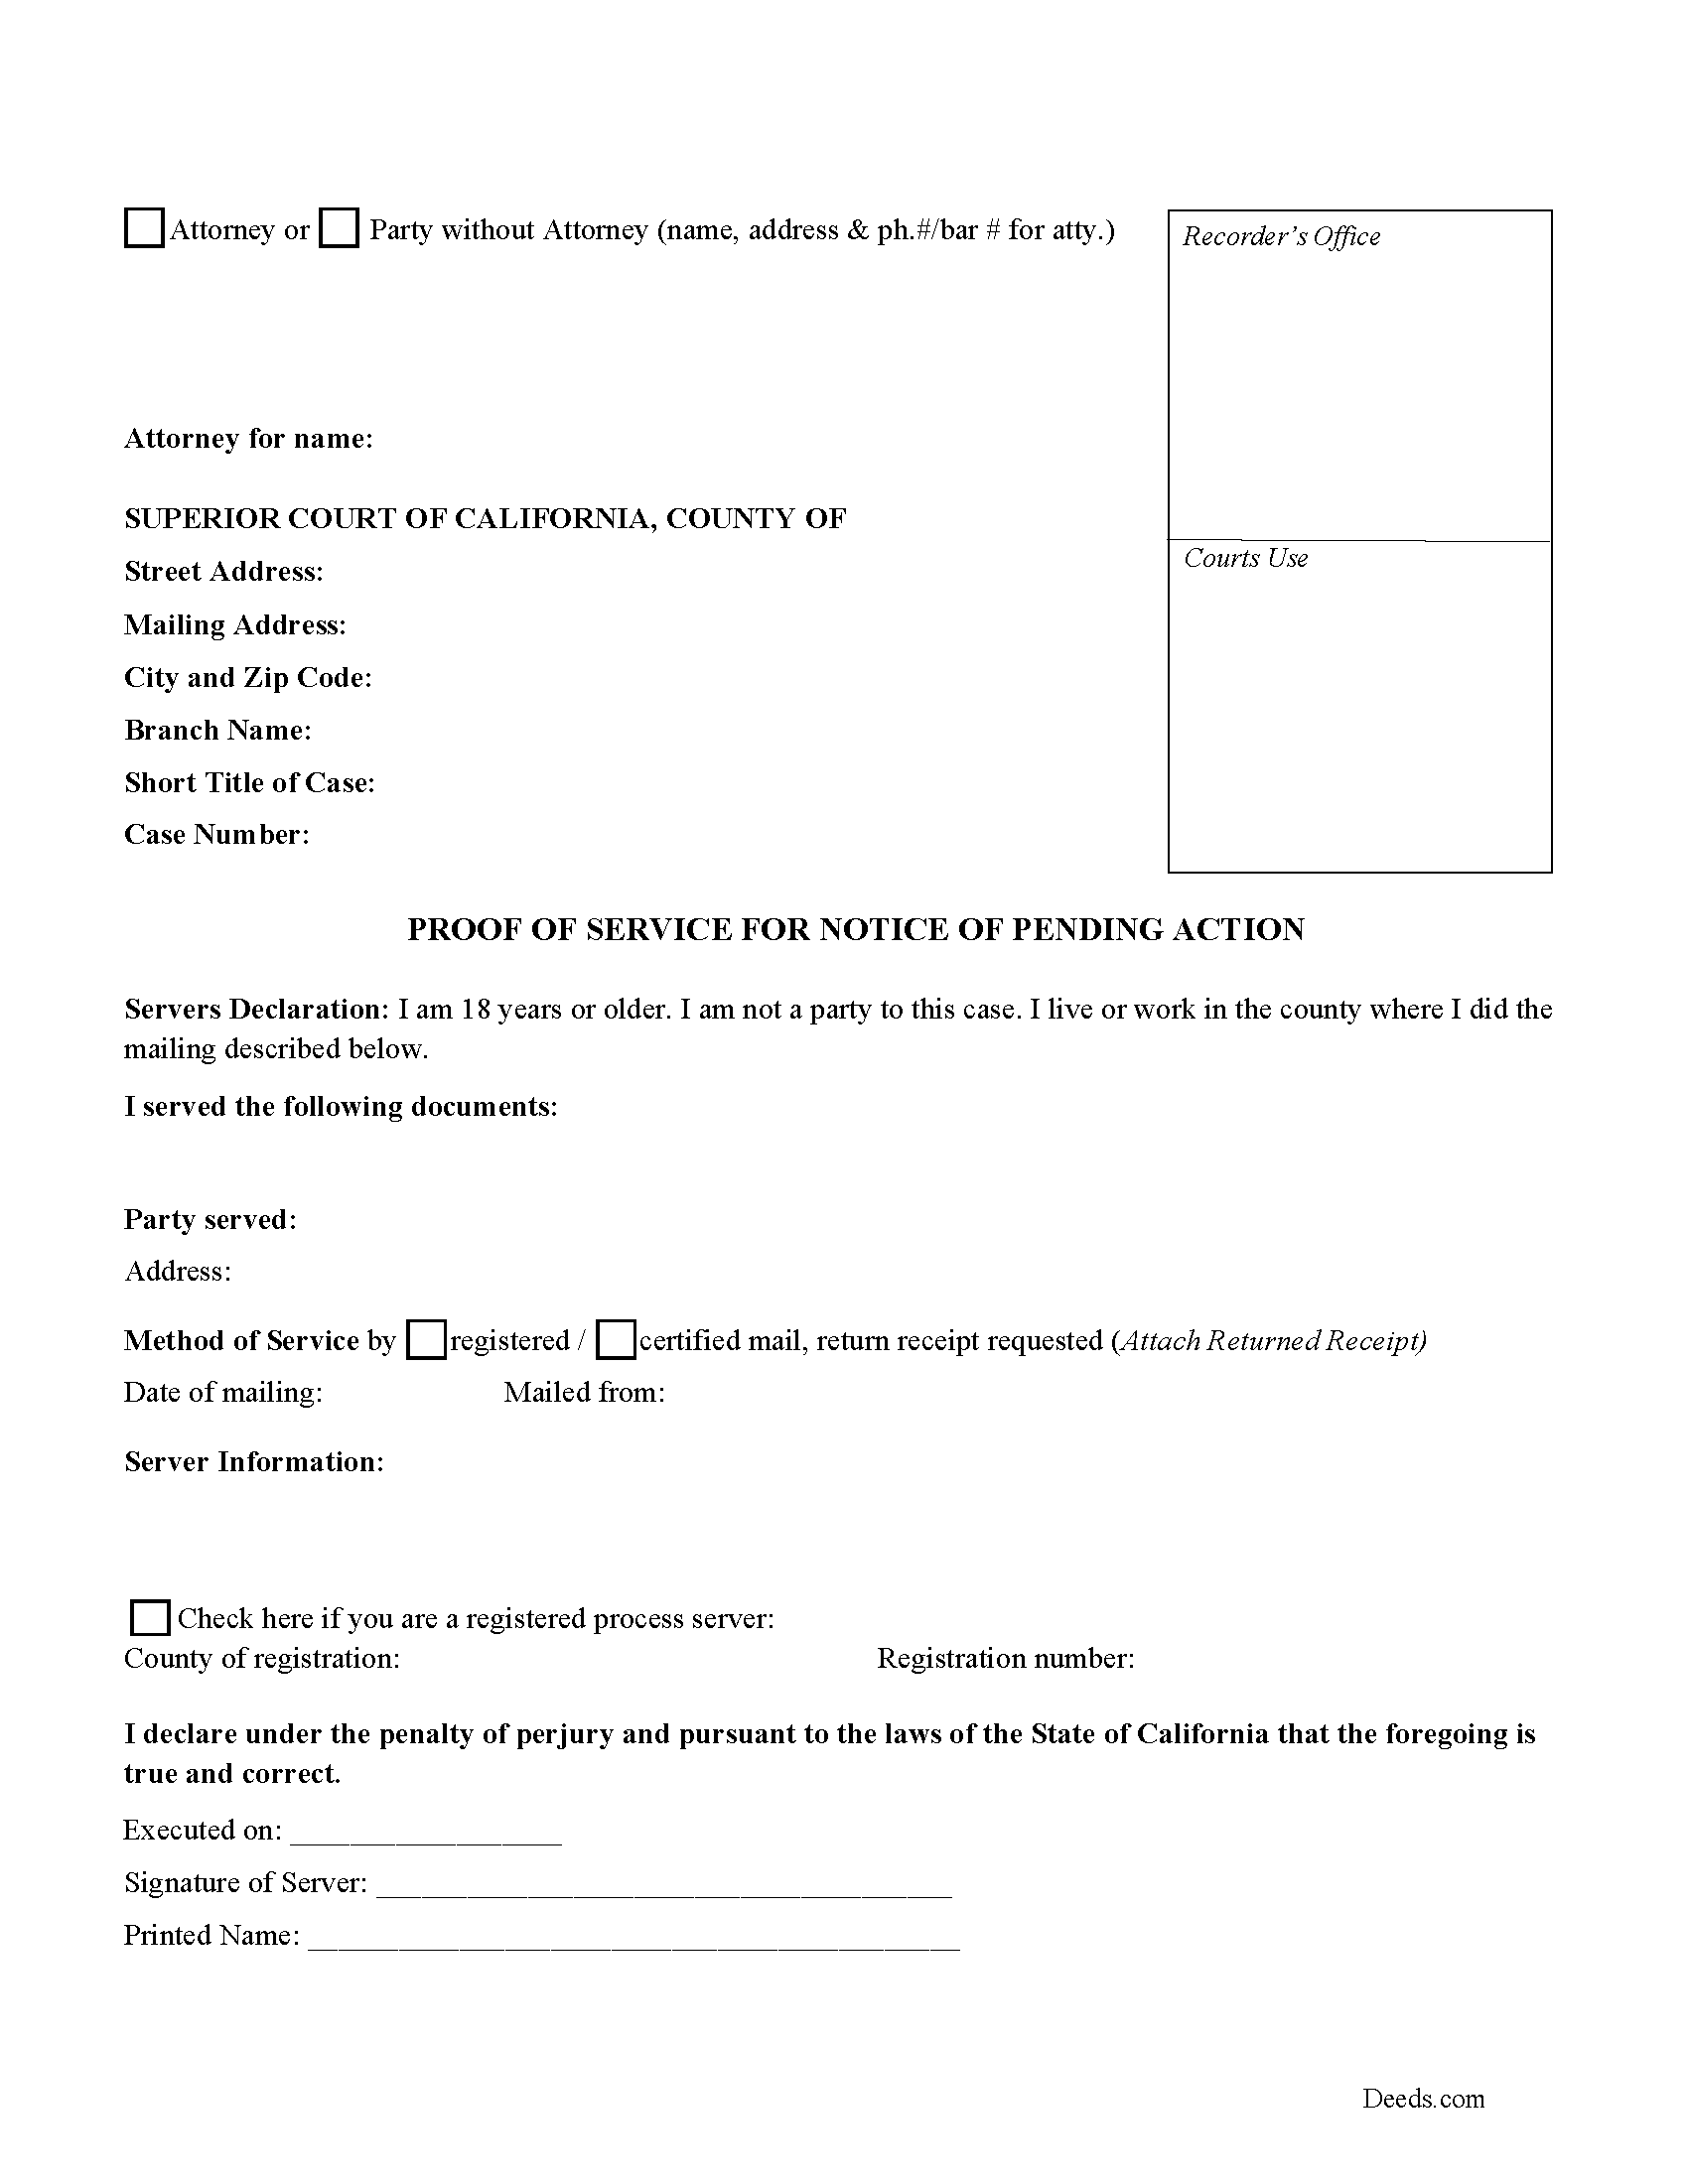 Proof of Service Form